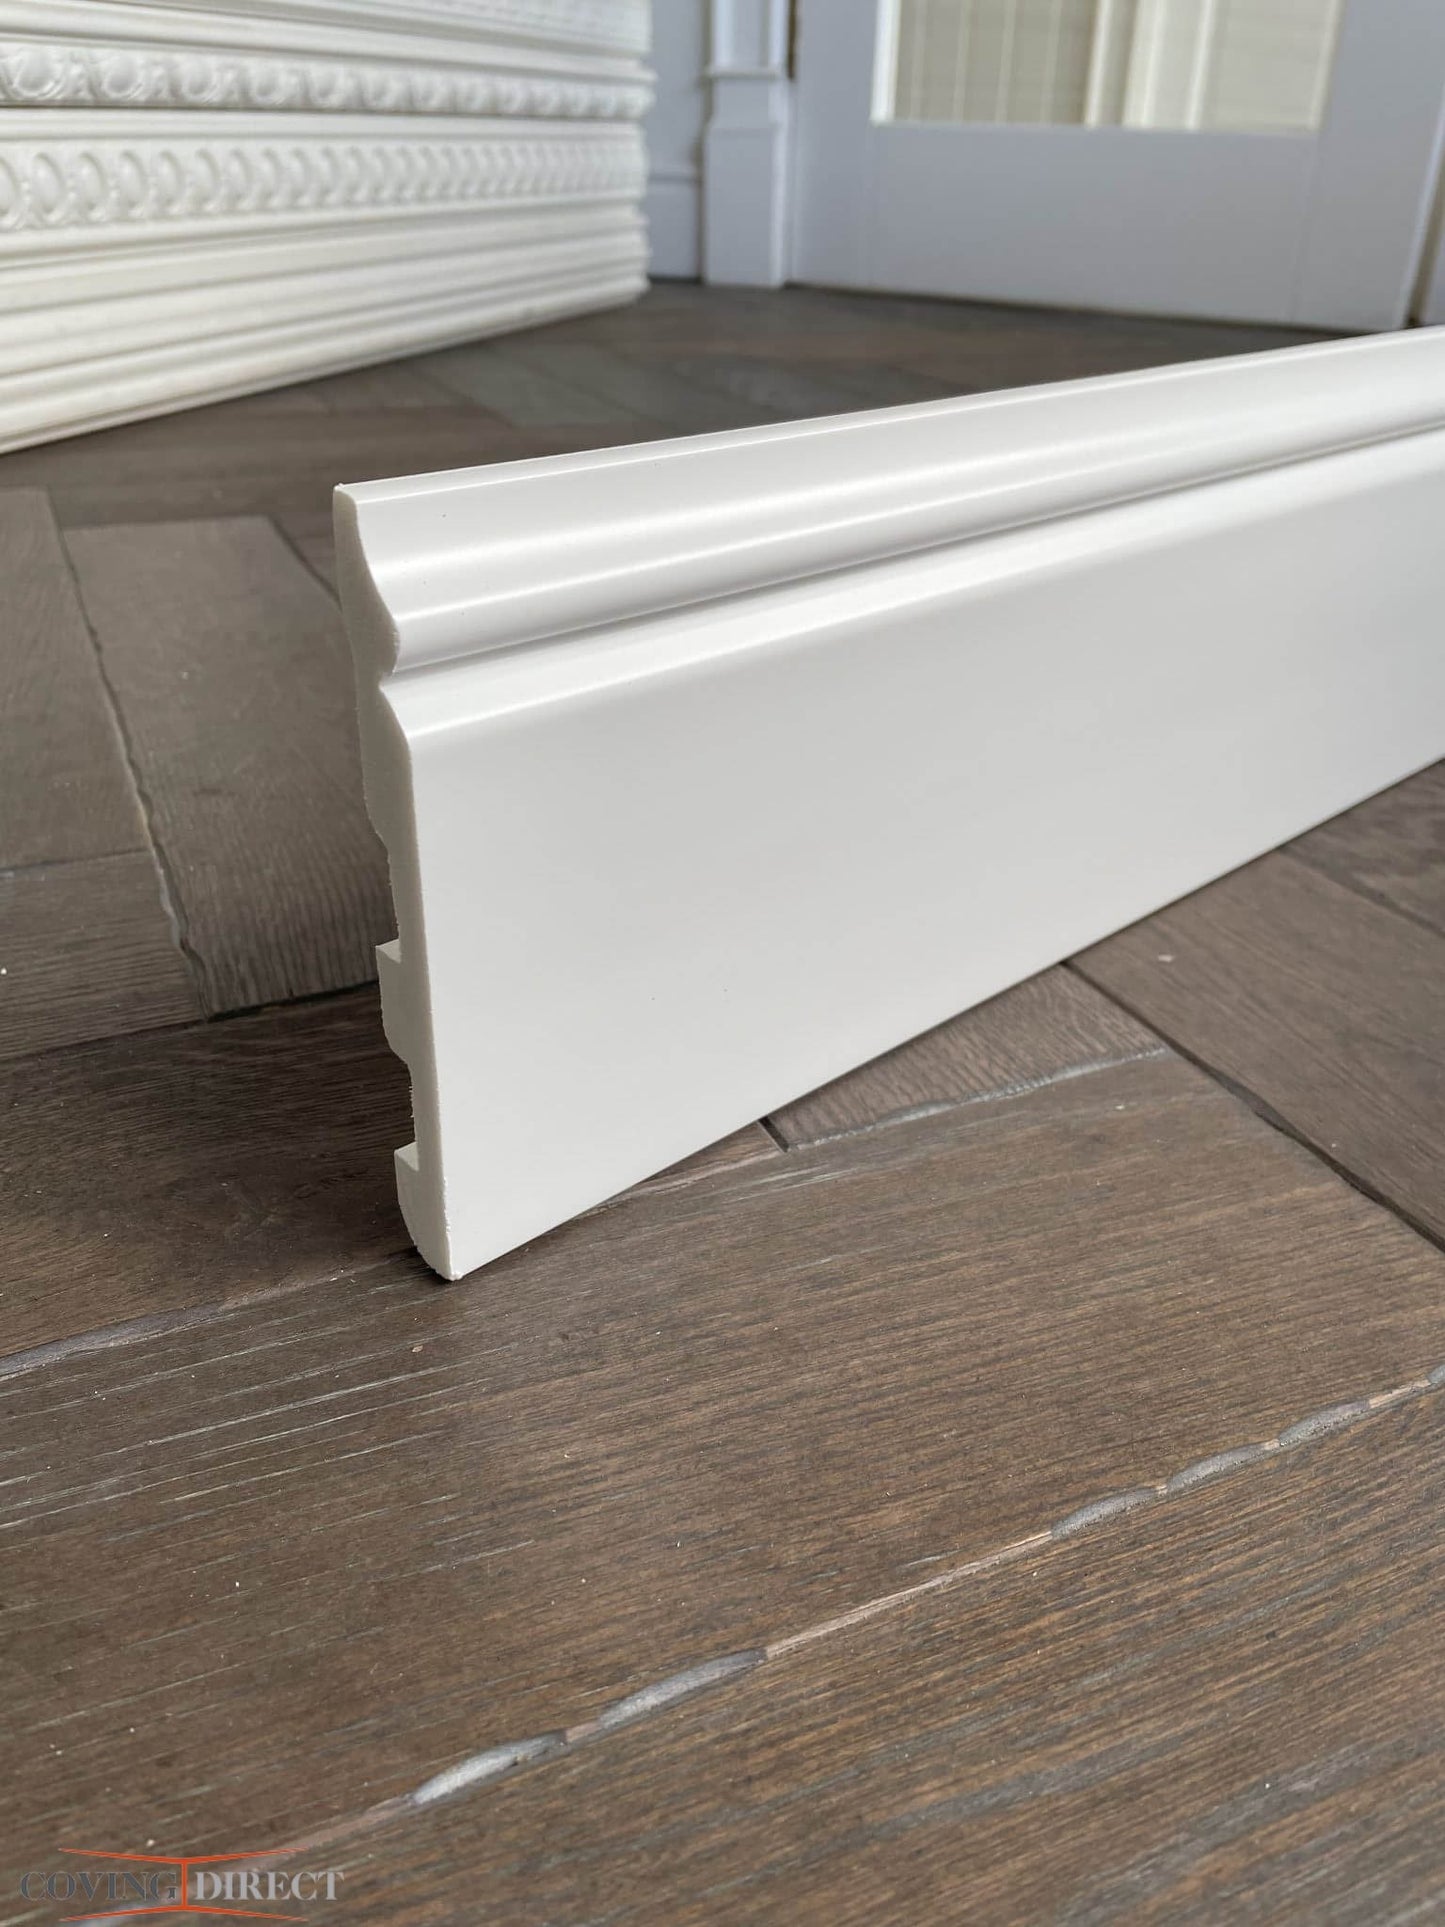 MD360P - Skirting Board on a floor